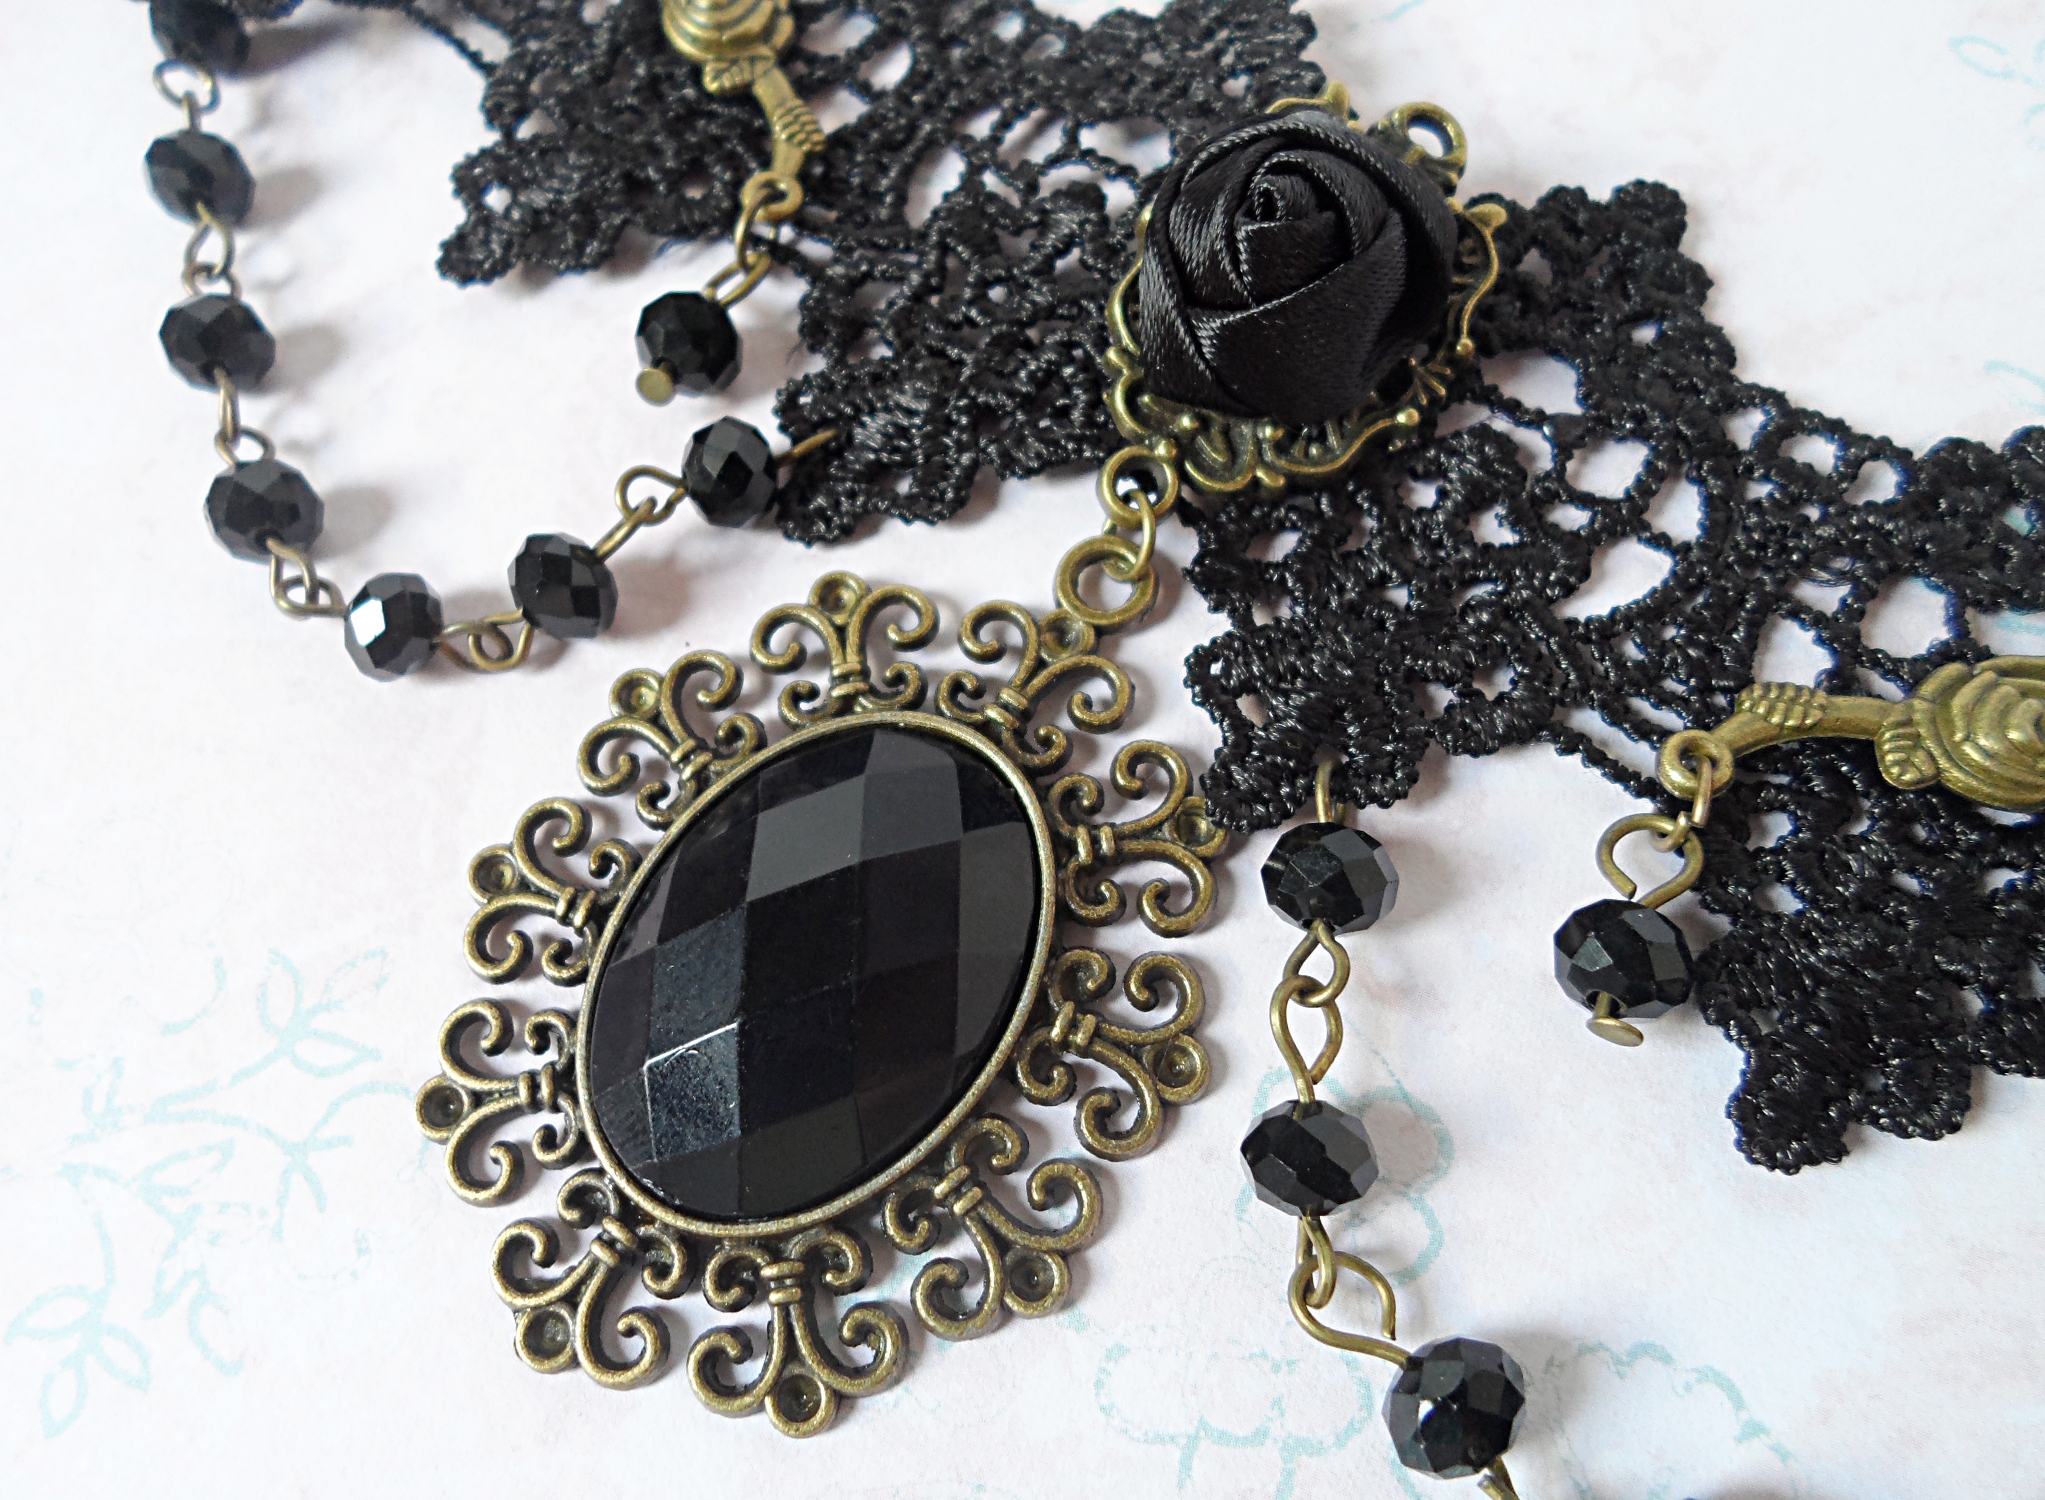 a very beautiful, gothic cameo necklace pictures and review by blogger